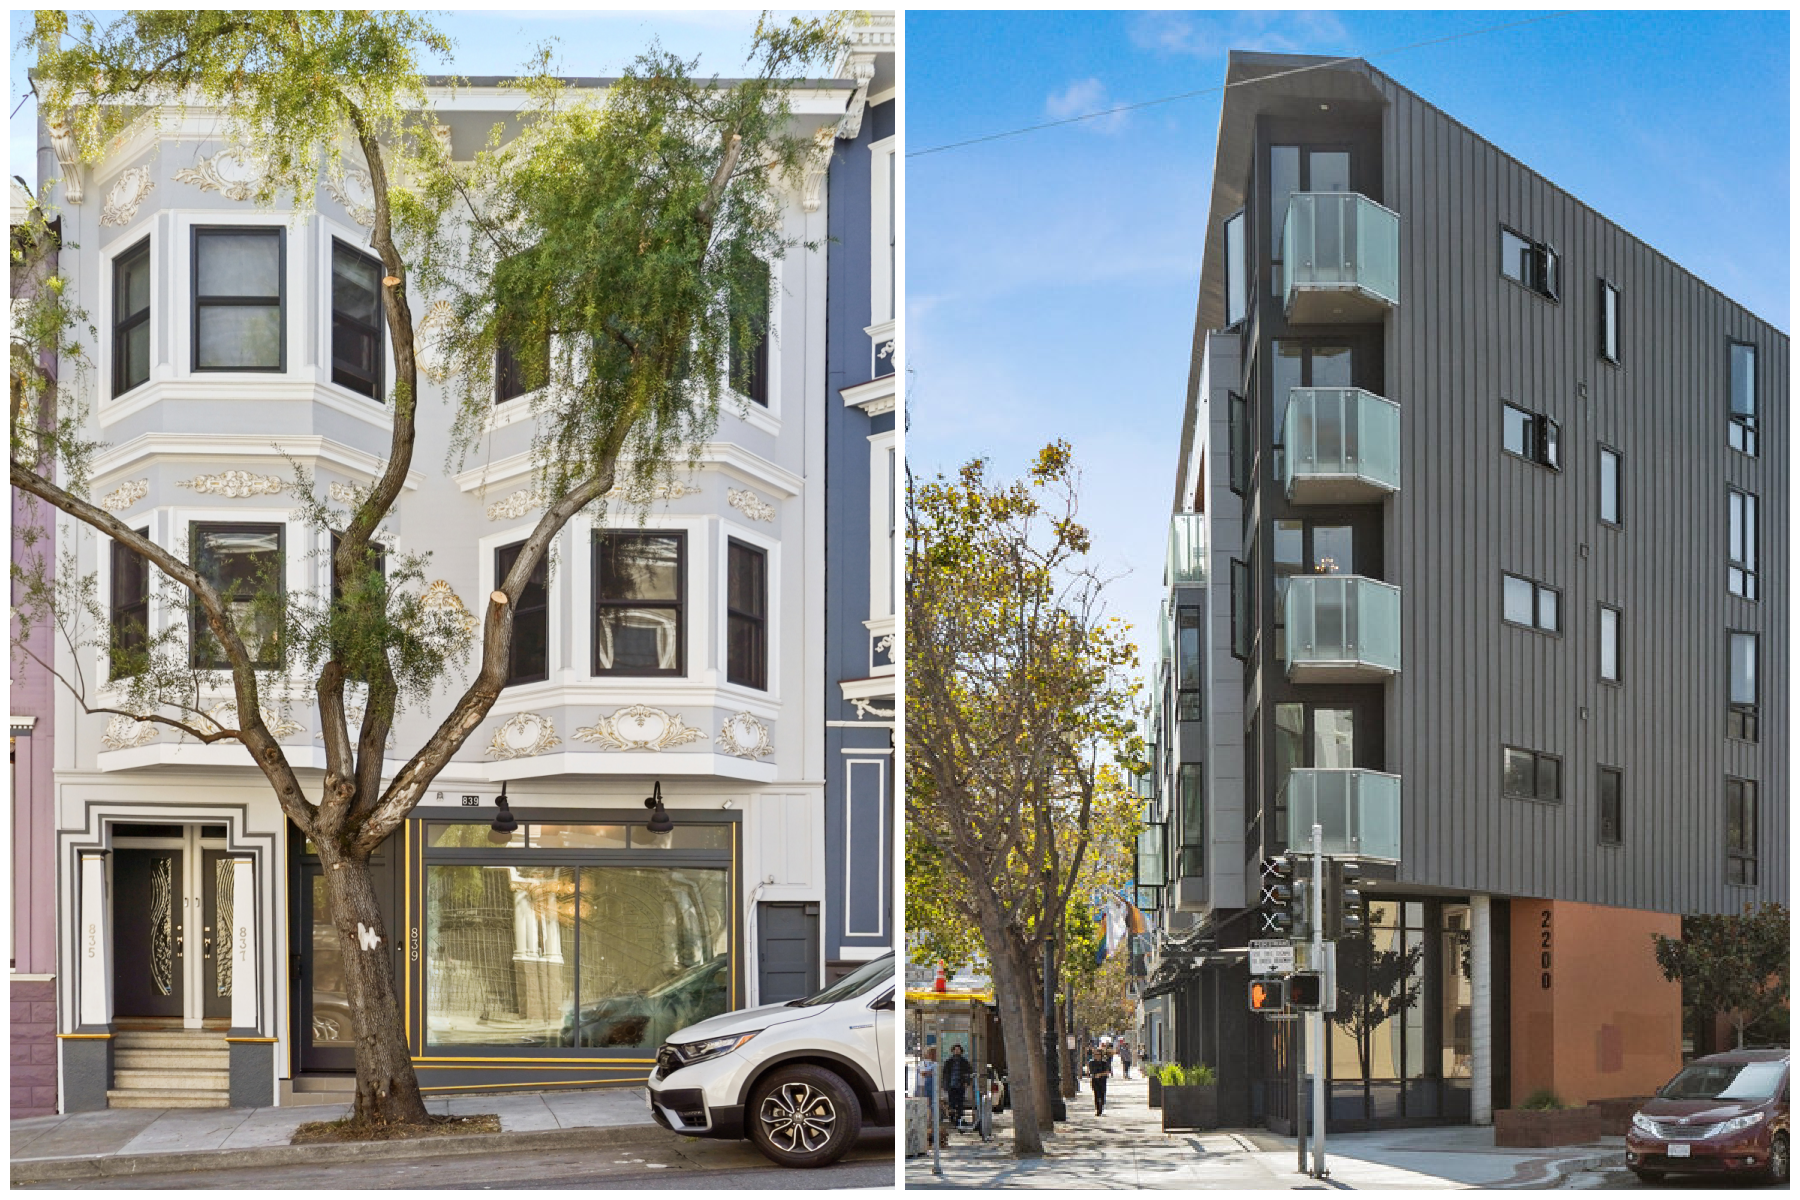 Buying San Francisco: Which condo in Duboce Triangle?